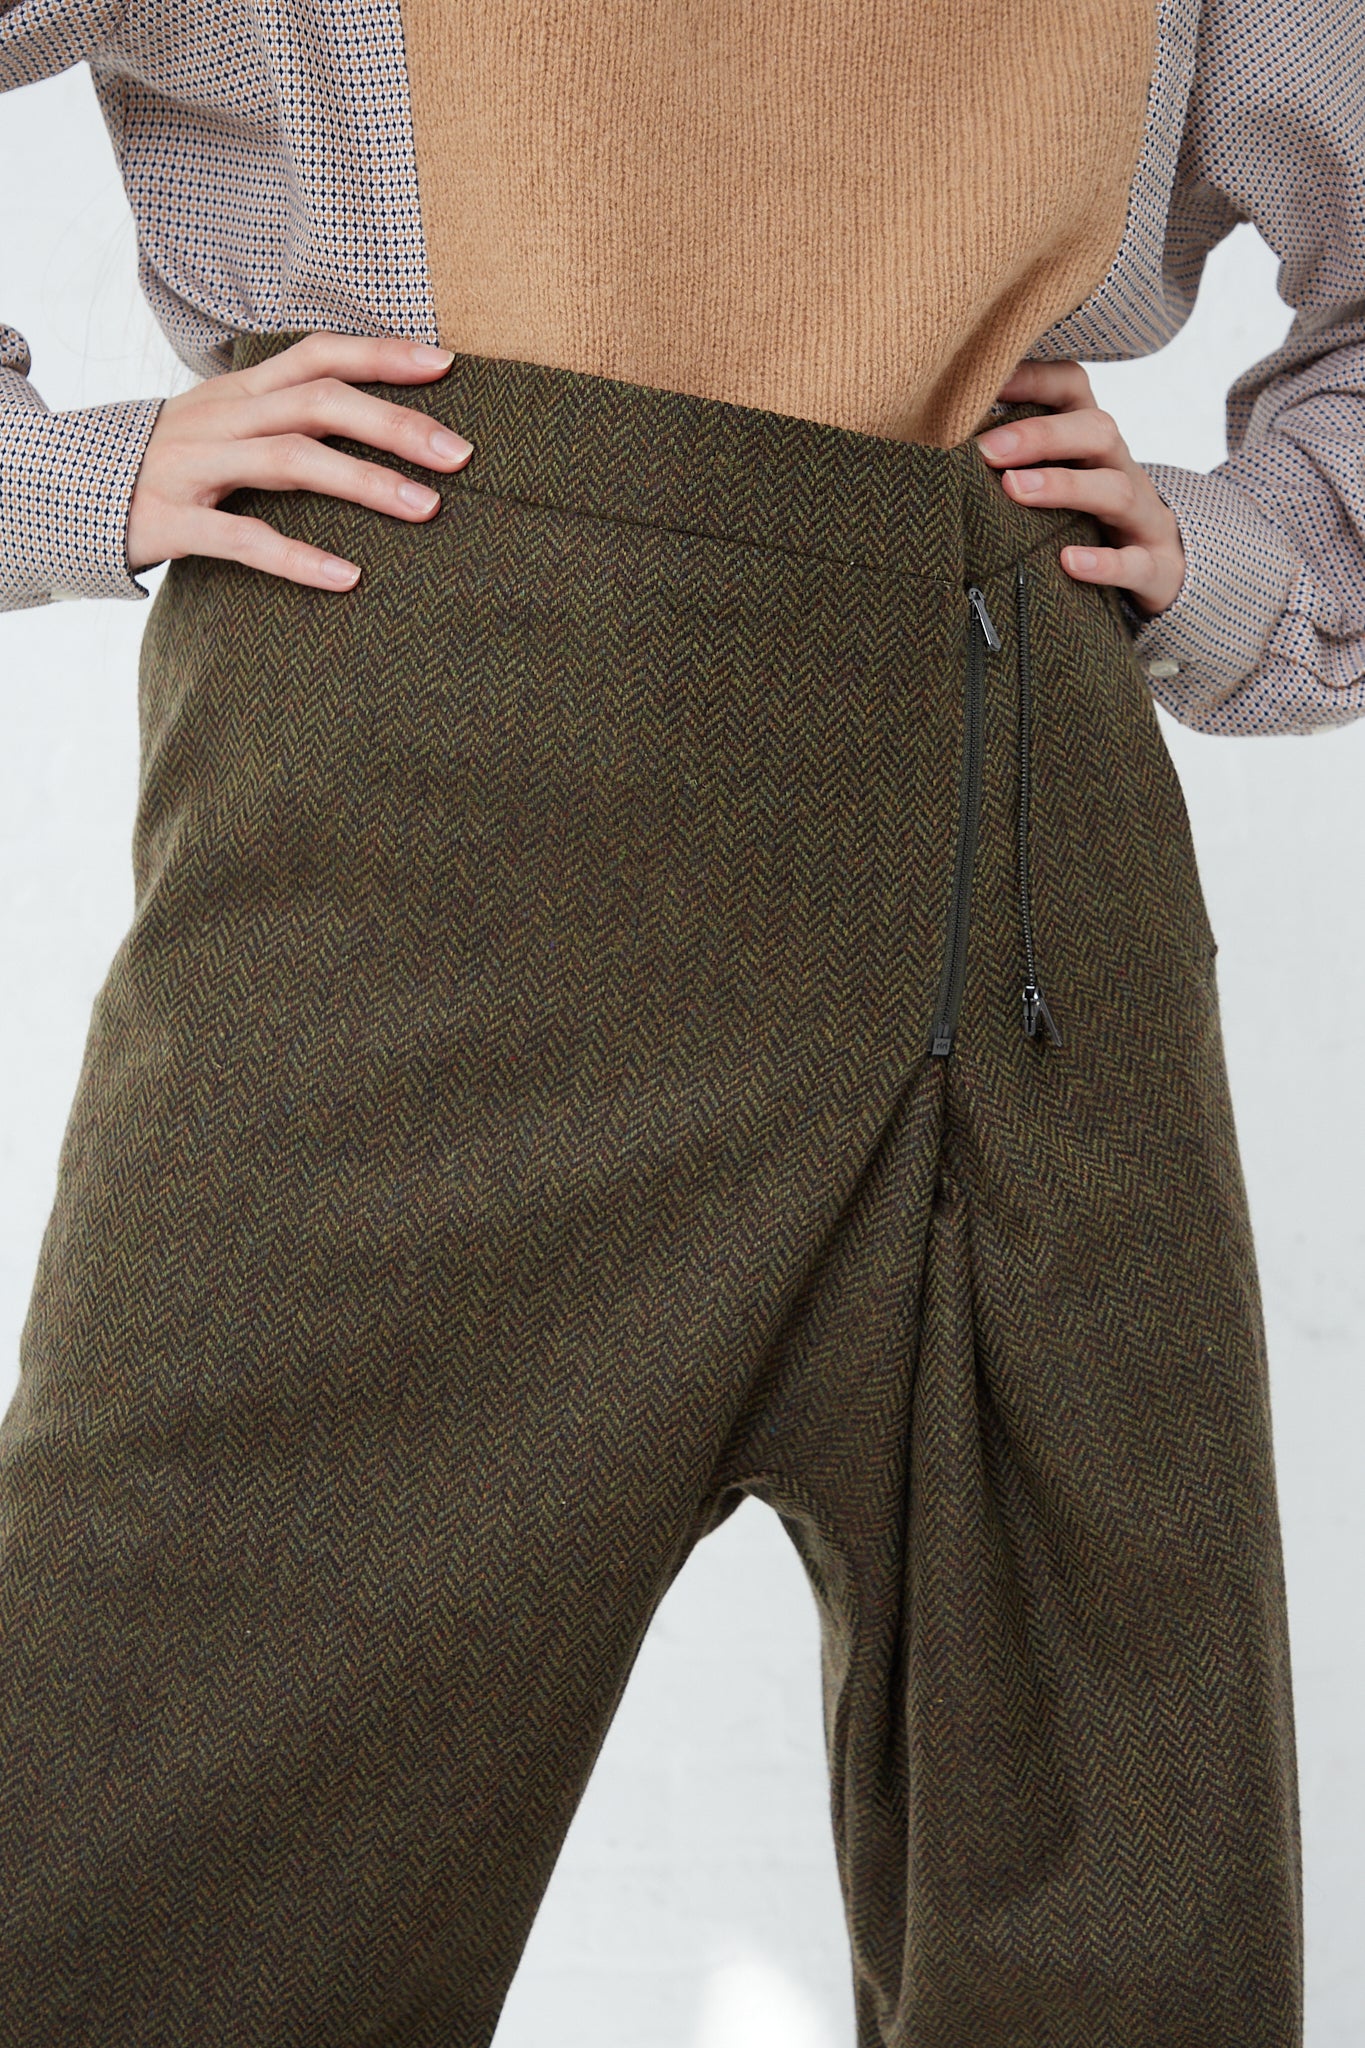 A woman wearing the Bless No. 75 Wool Long Pant in Purple Greenish Tweed, a tan sweater with an adjustable zipper accent in front.